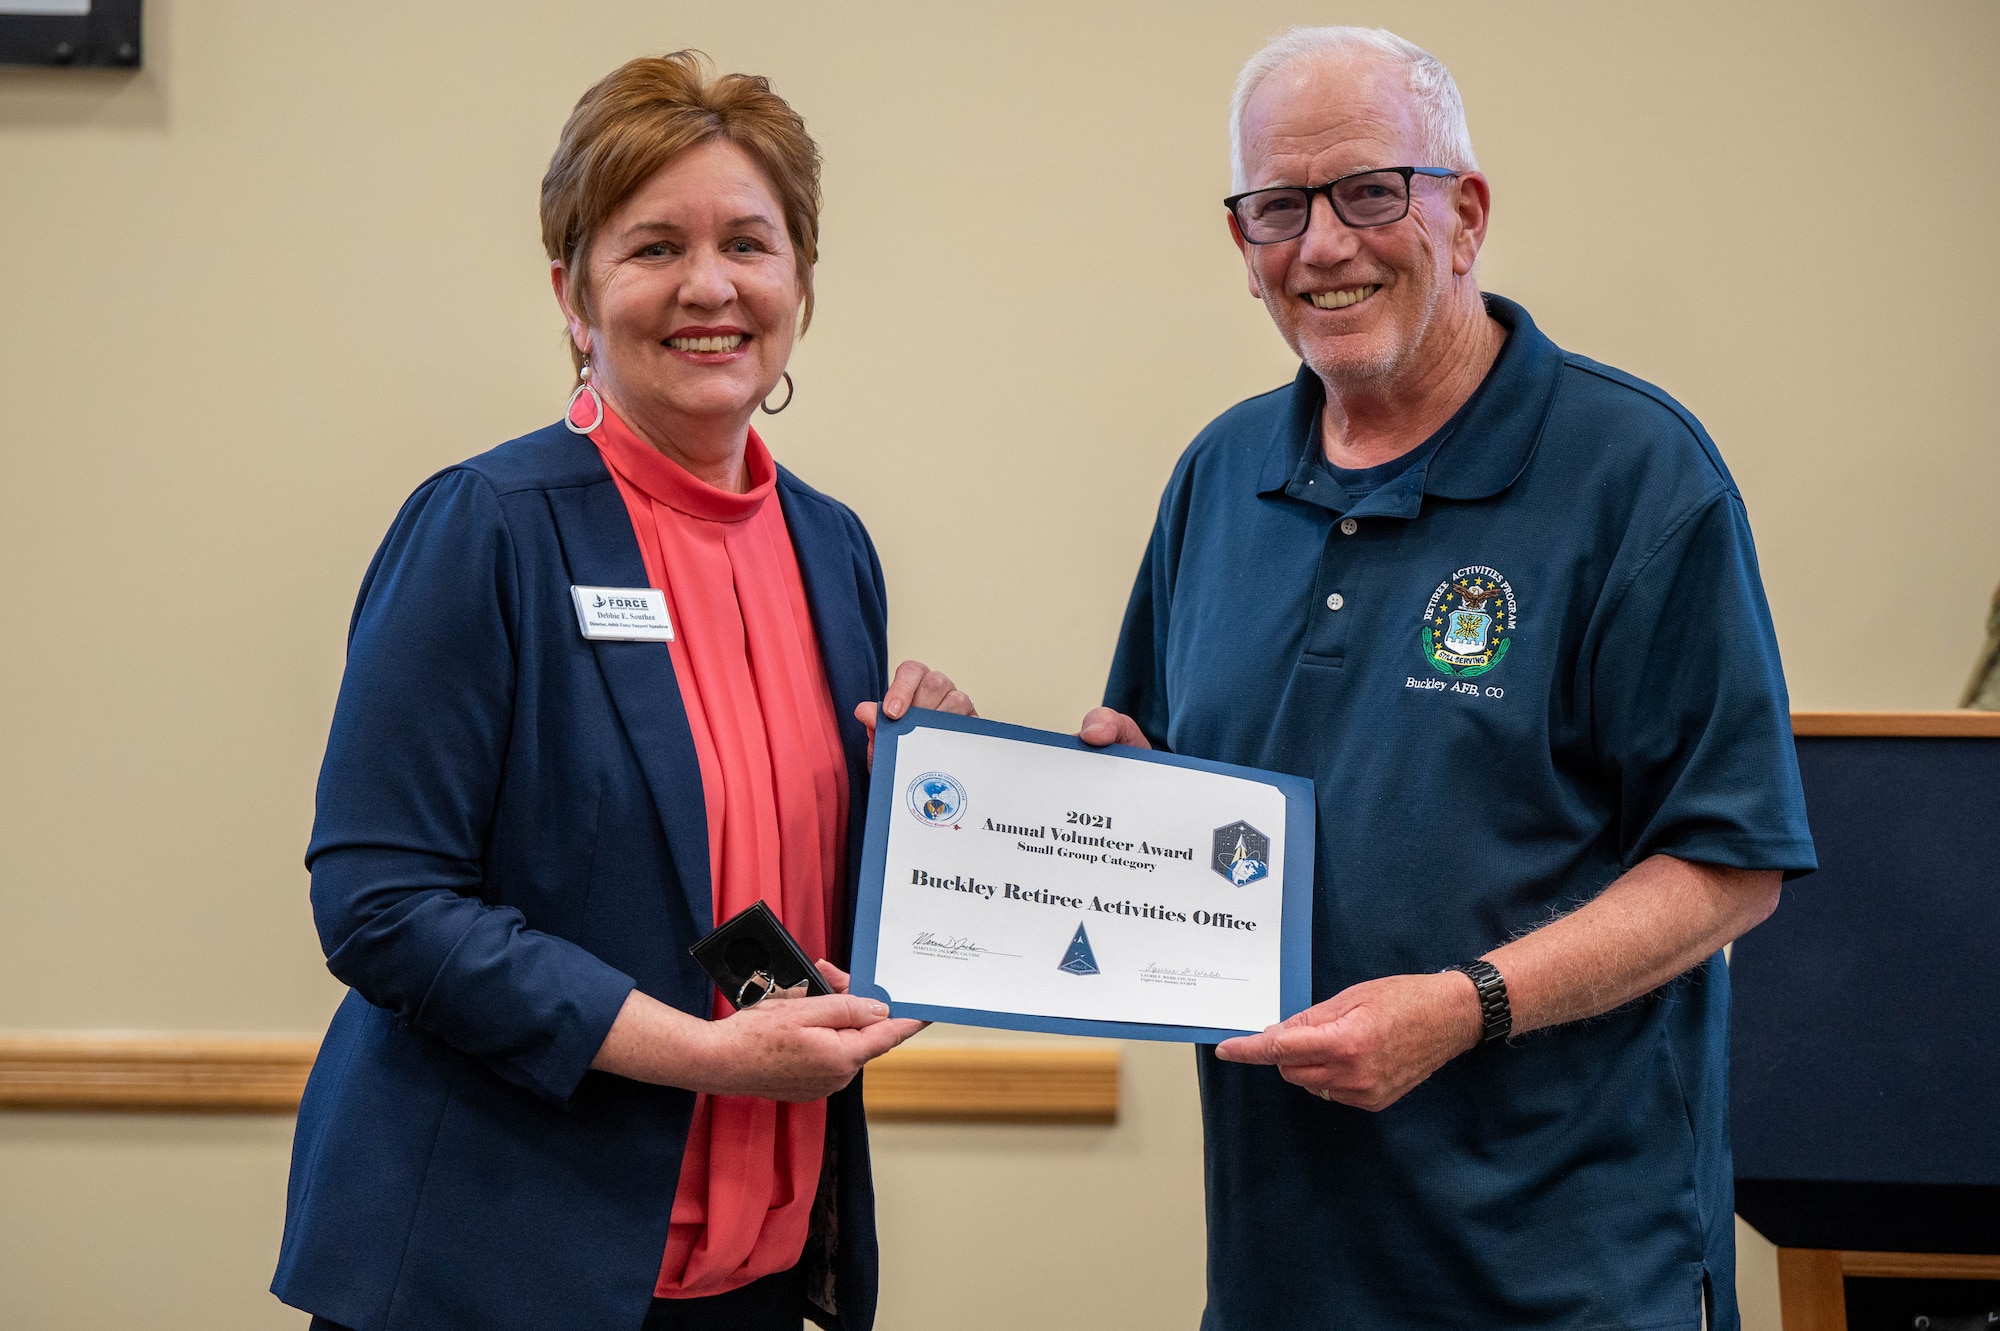 Gary Kelsey, an employee working with the Buckley Retiree Activities office, receives an annual volunteer award for the Retiree Activities office from Mrs. Debbie South, Director of the 460th Force Support Squadron at Buckley Space Force Base, Colo., April 22, 2022.